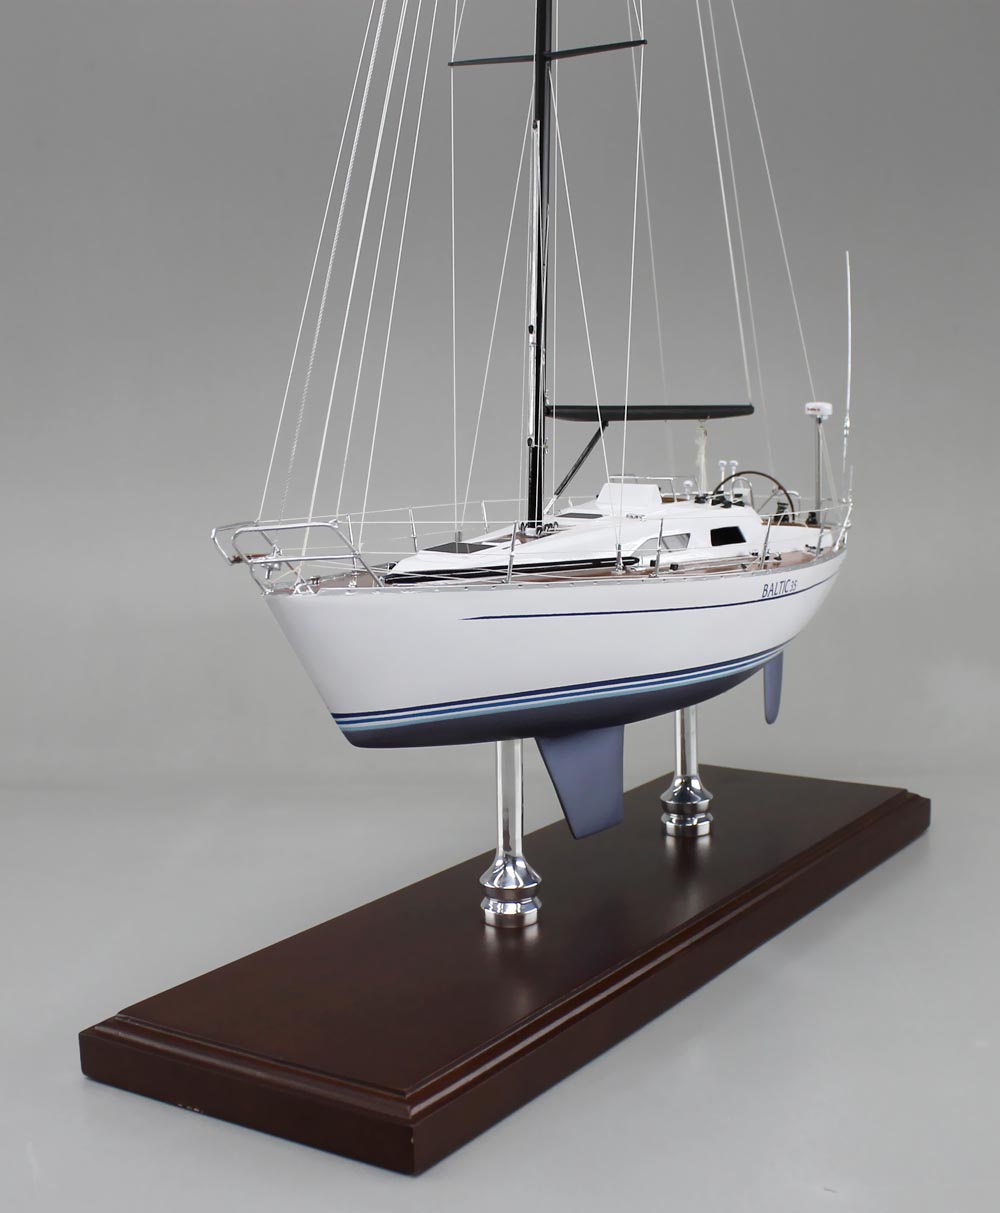 sd model makers: an 18 inch scale model sailboat - a baltic 35